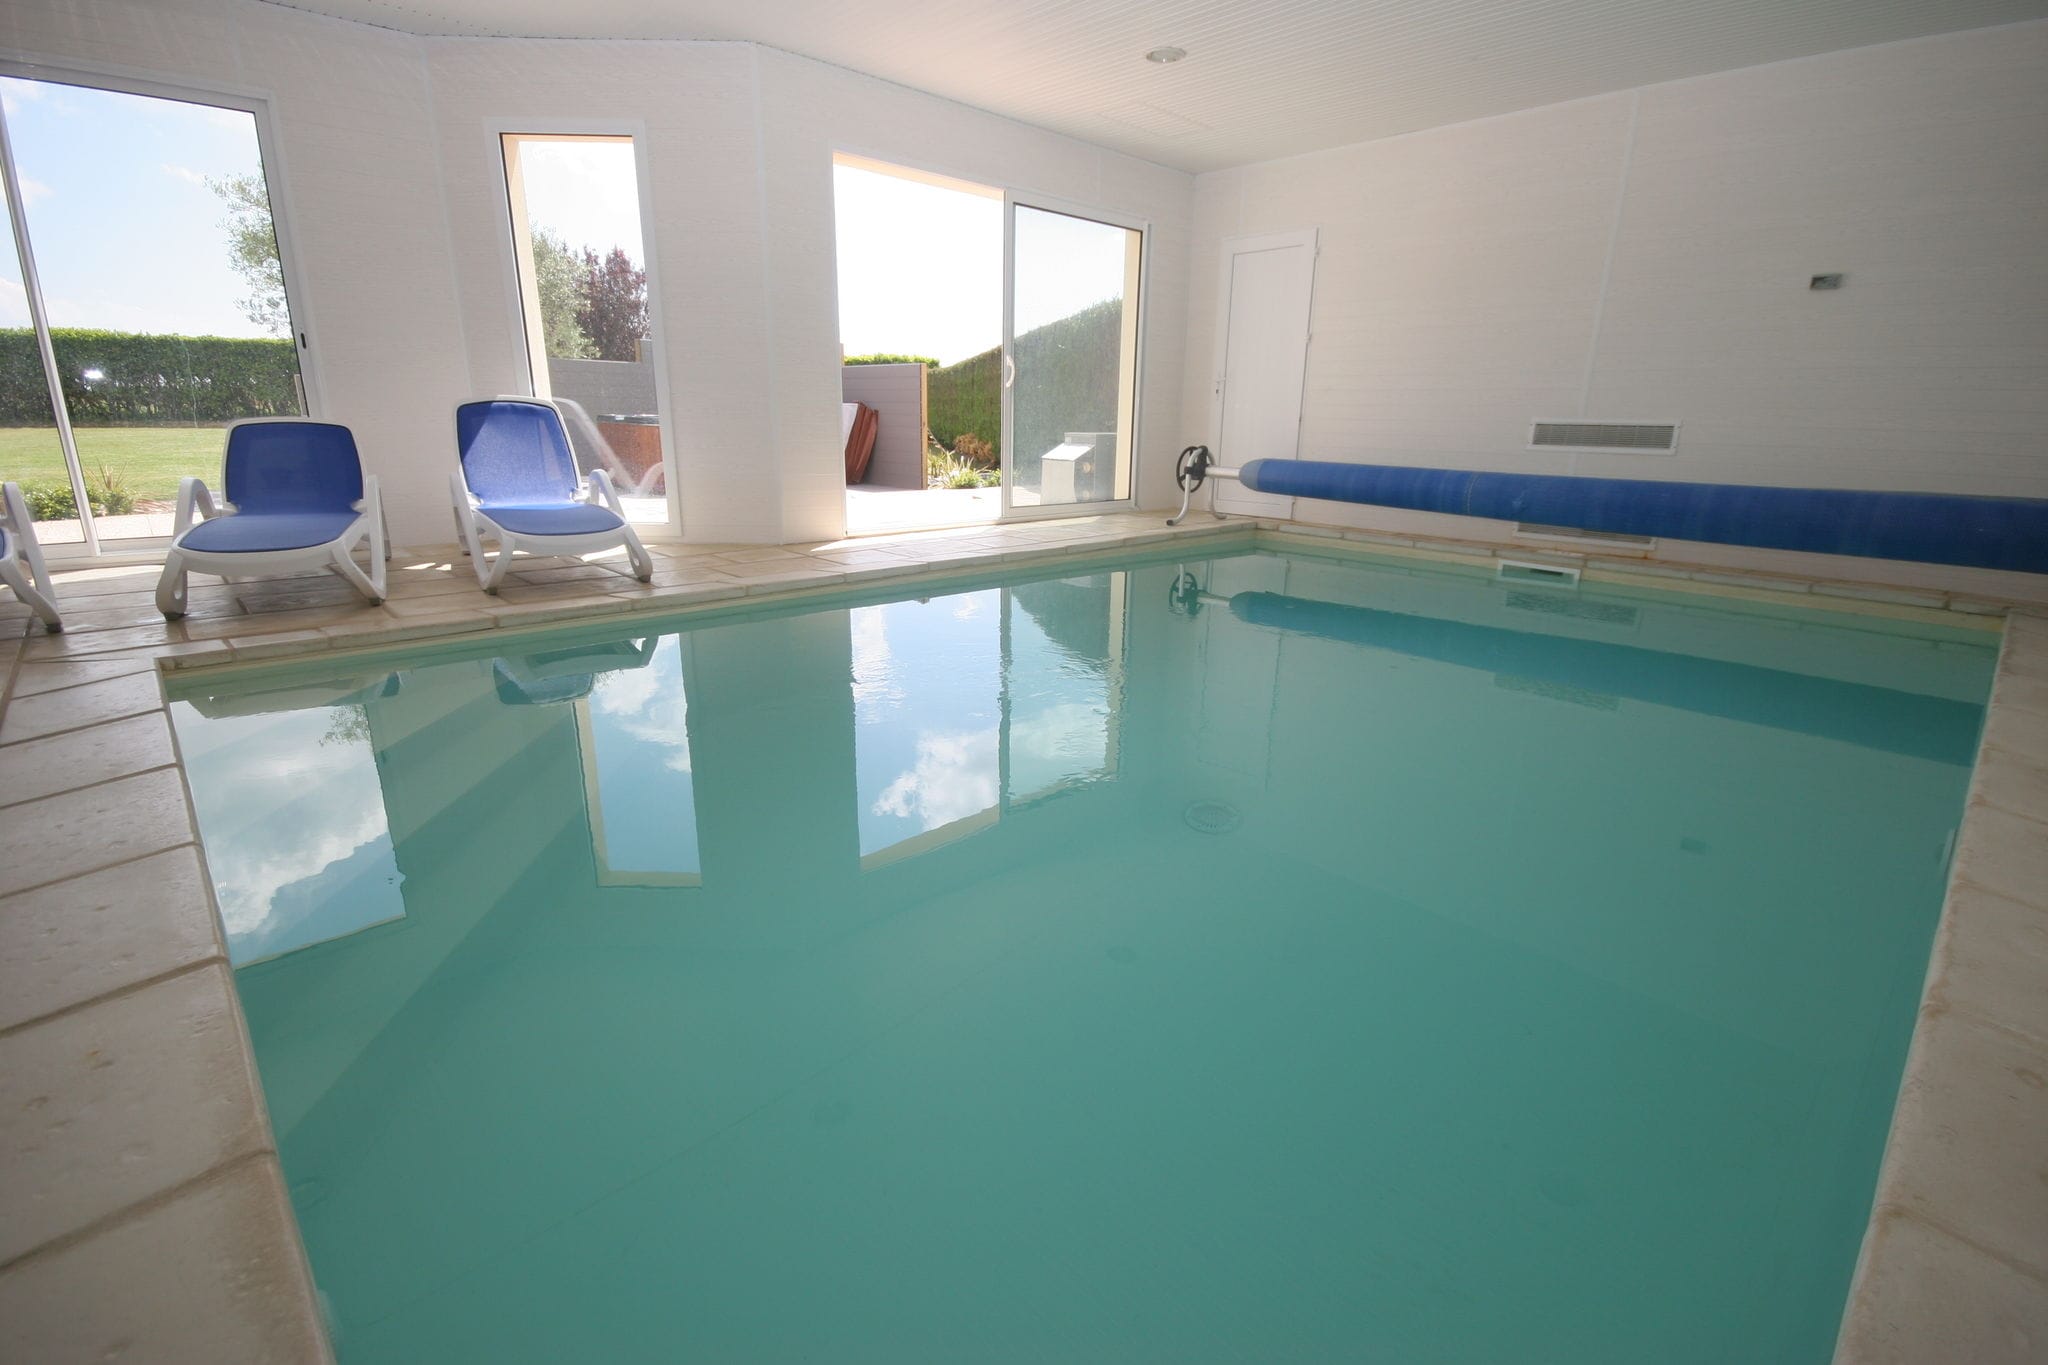 Villa with indoor heated pool and jacuzzi, only 1.5 km of beach and sea